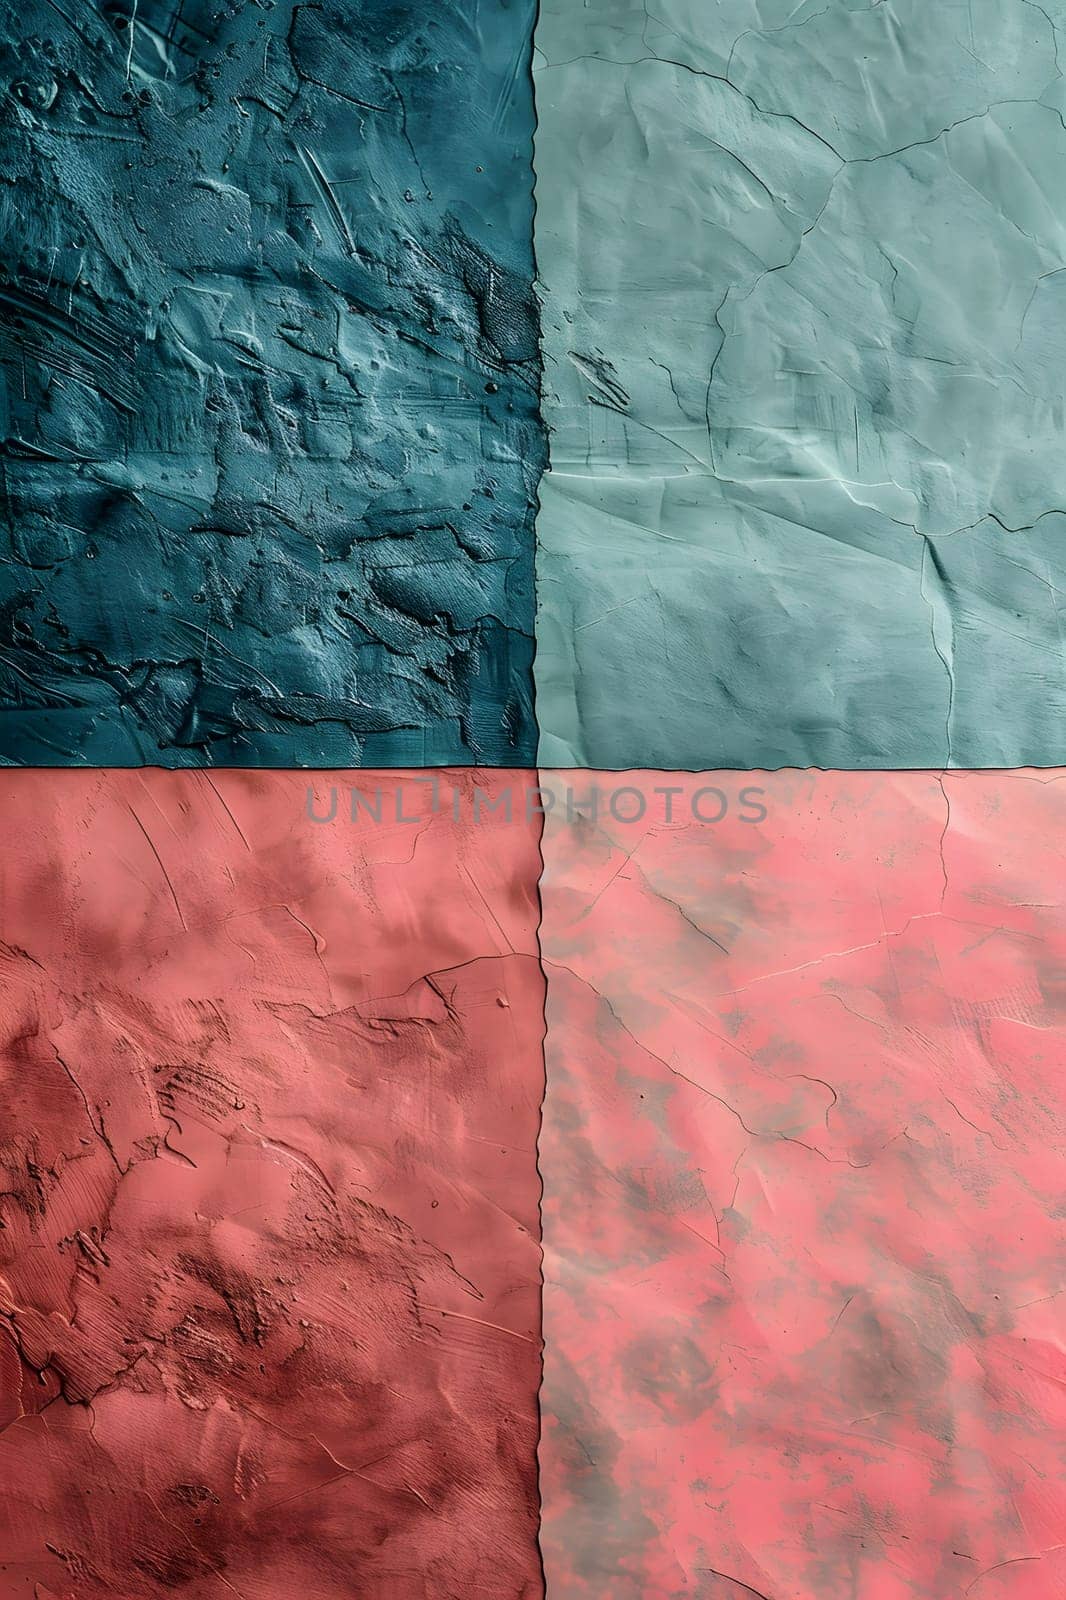 a close up of four different colored crumpled paper by Nadtochiy